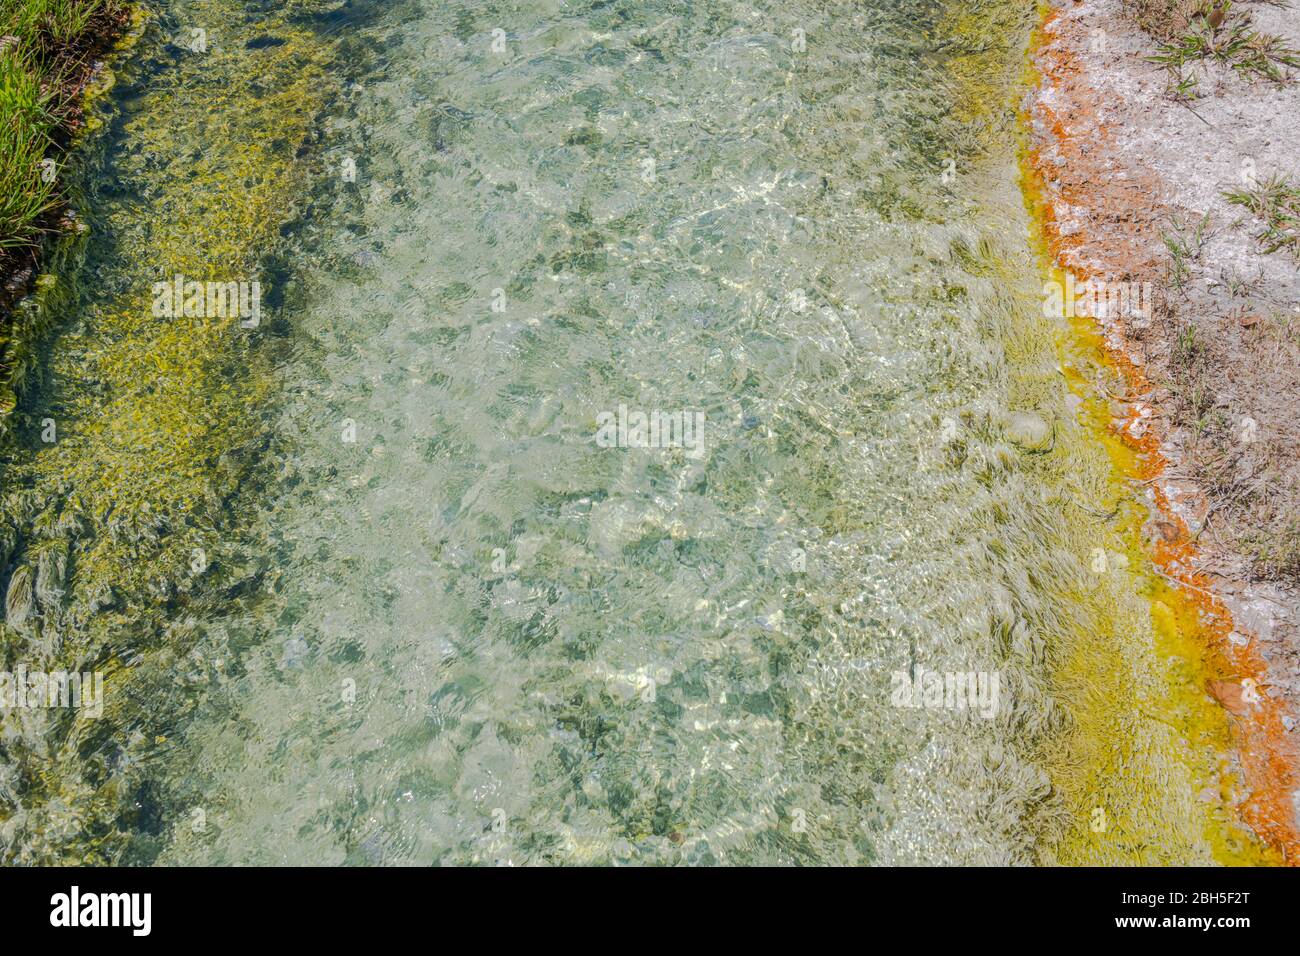 Abstract Colorful Mineral-laden Hot Water Spring Detail Stock Photo